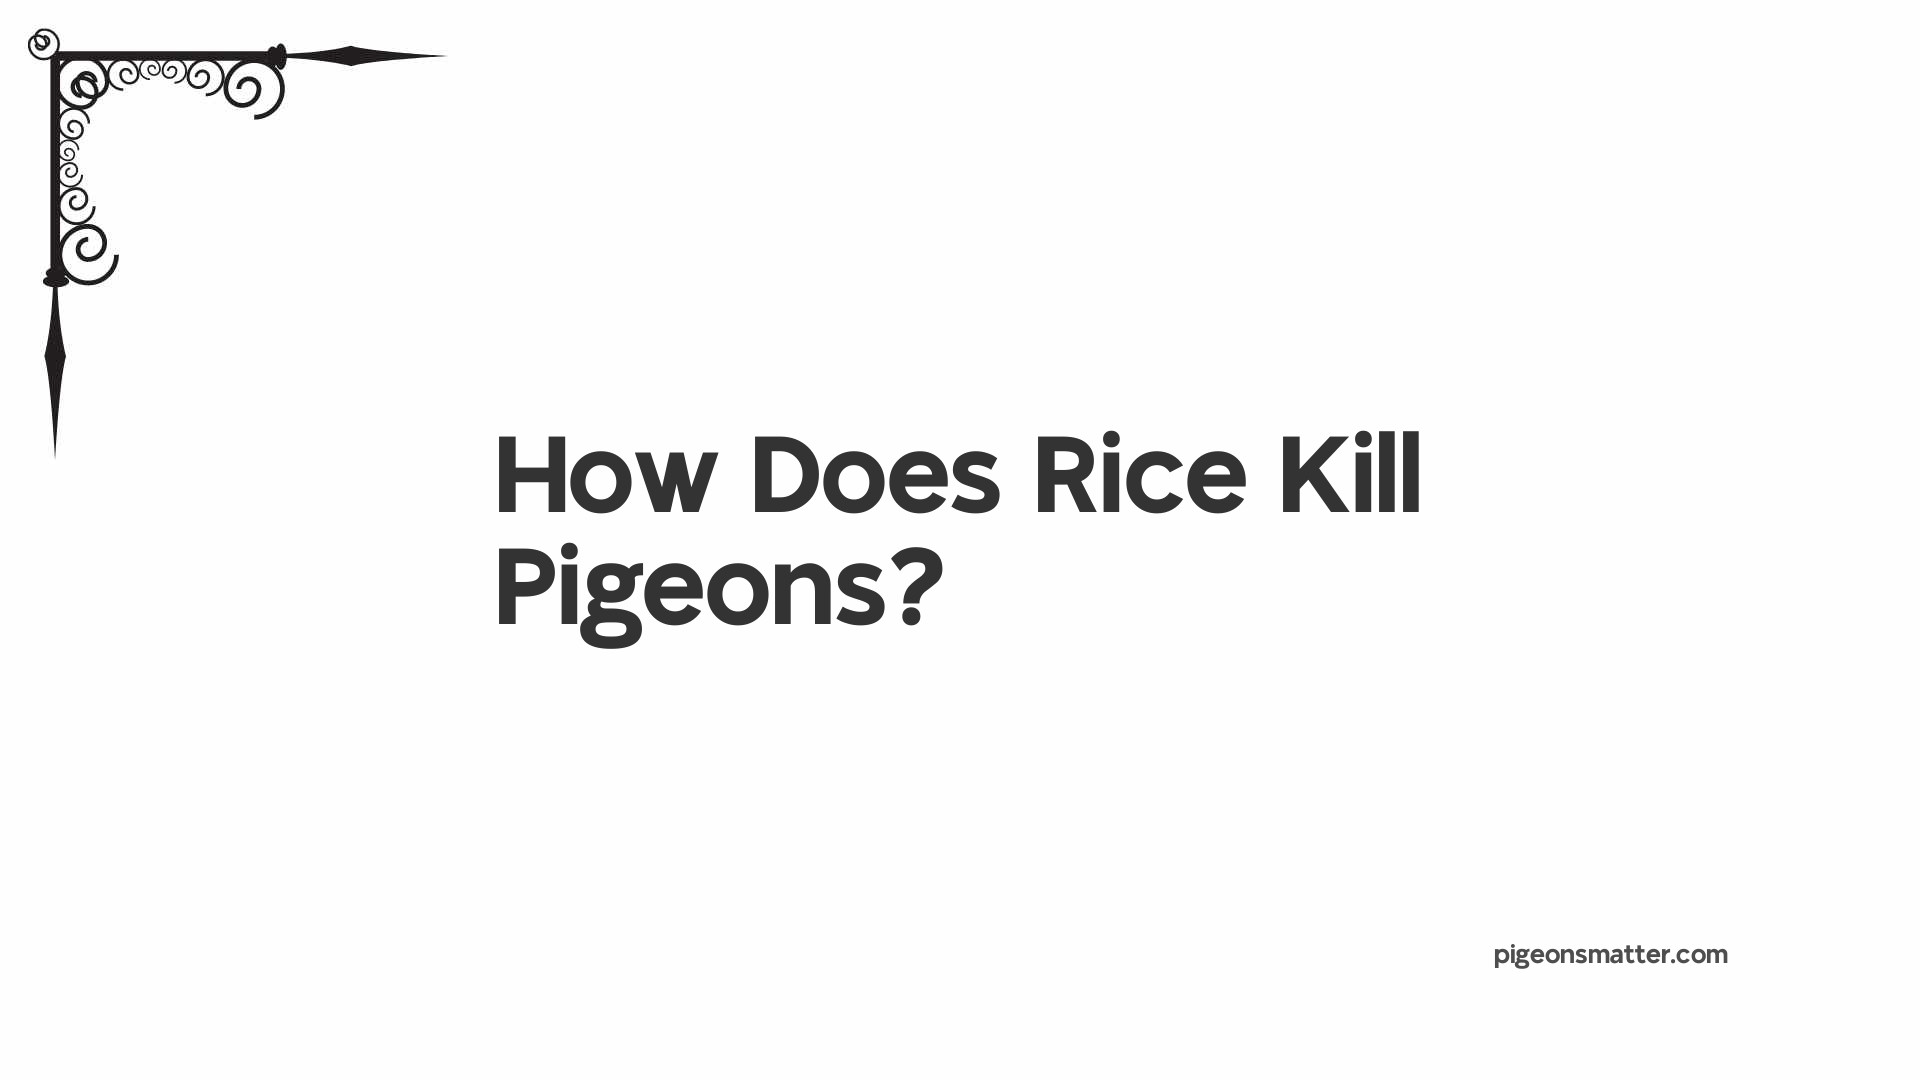 How Does Rice Kill Pigeons?